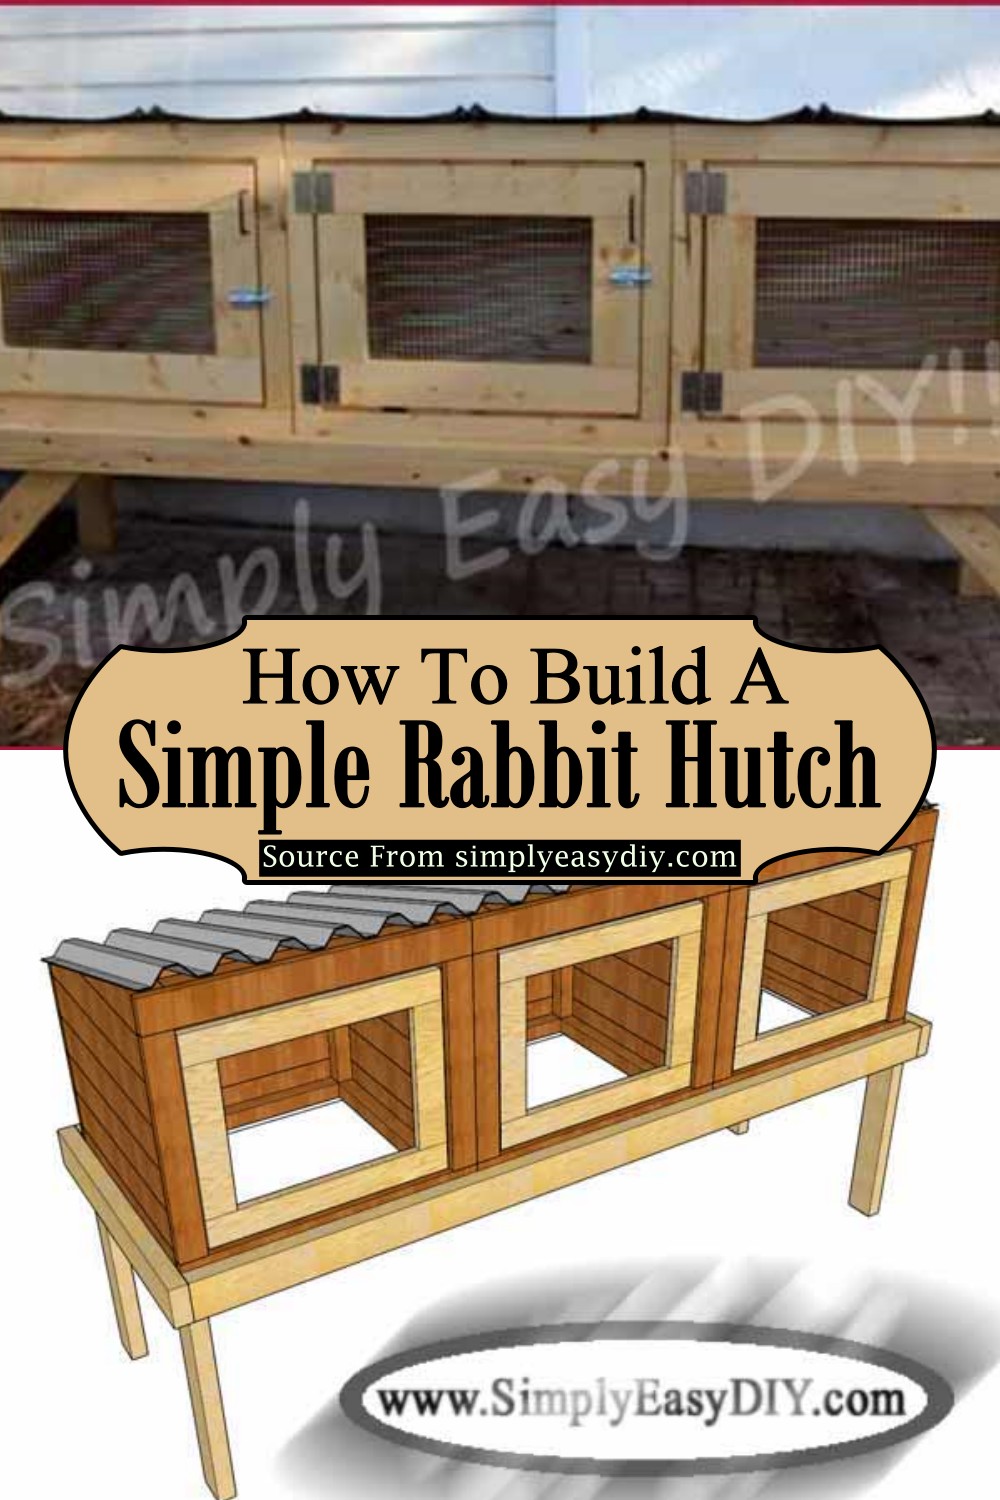 How To Build A Simple Rabbit Hutch